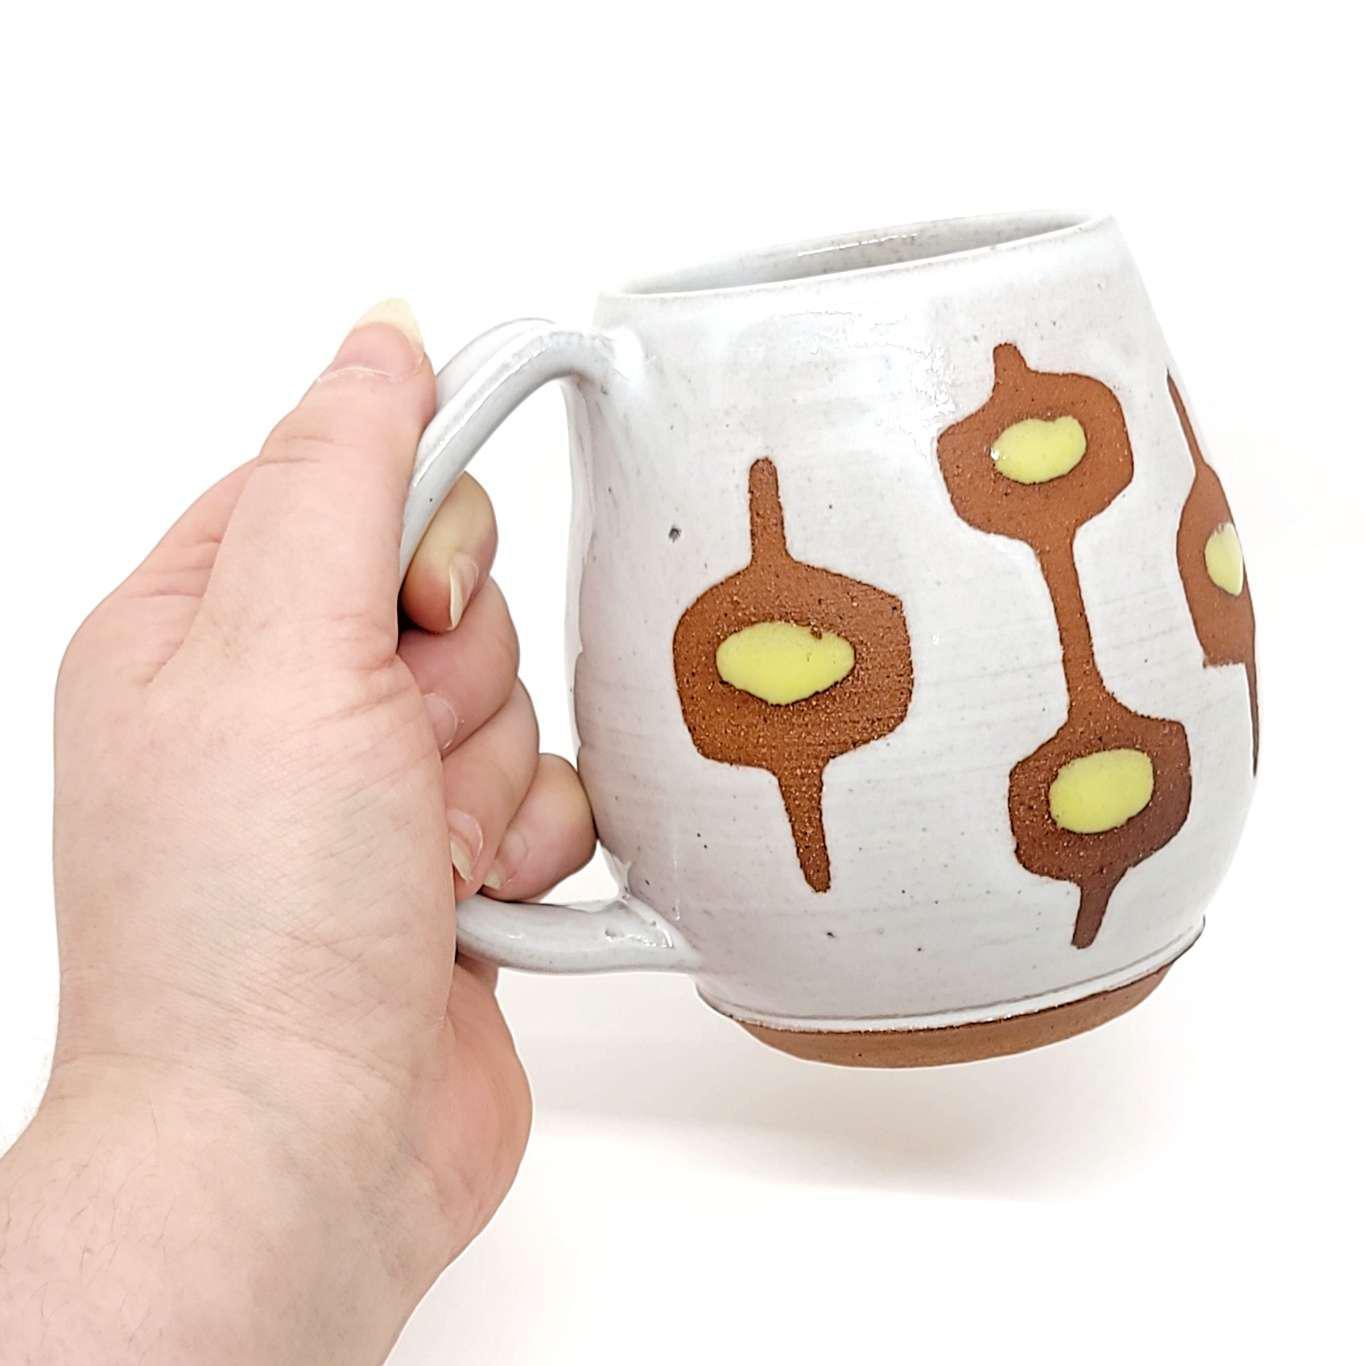 Mug - Mid-Century Modern in White and Yellow by Fern Street Pottery